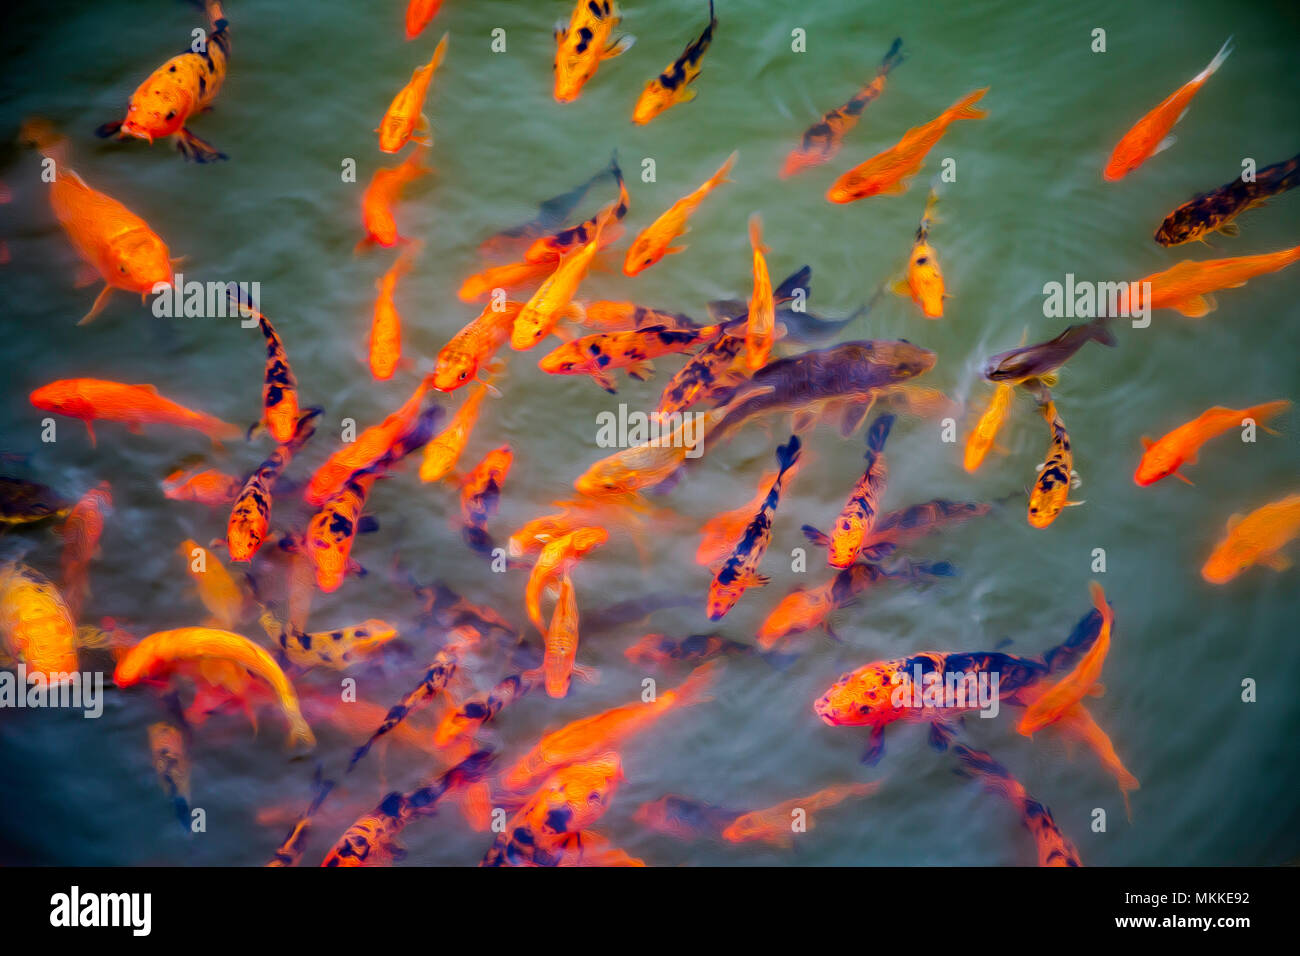 A stylized image of ornamental koi fish, Cyprinus carpio, at one of the ponds in the Buddha Eden Garden, Carvalhal, Portugal. Stock Photo